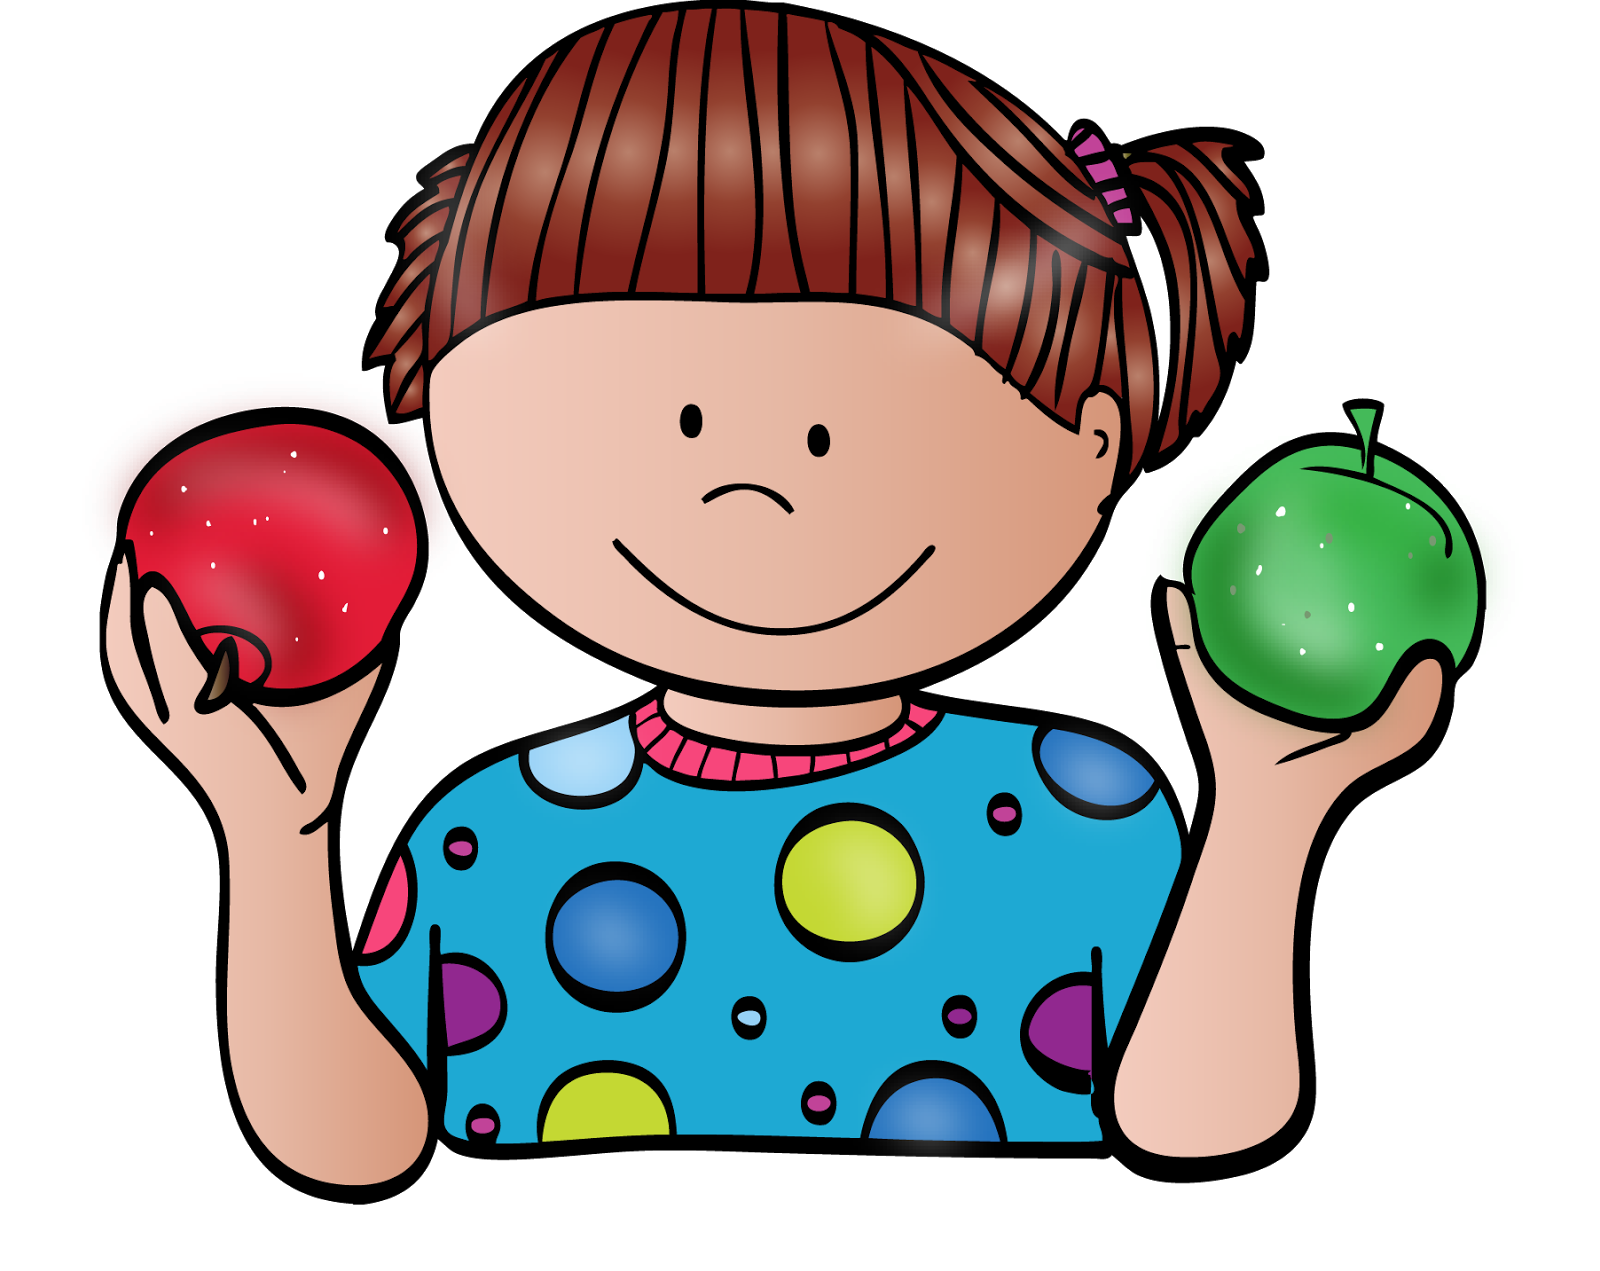 Hayride clipart happy. Learning activities for kids